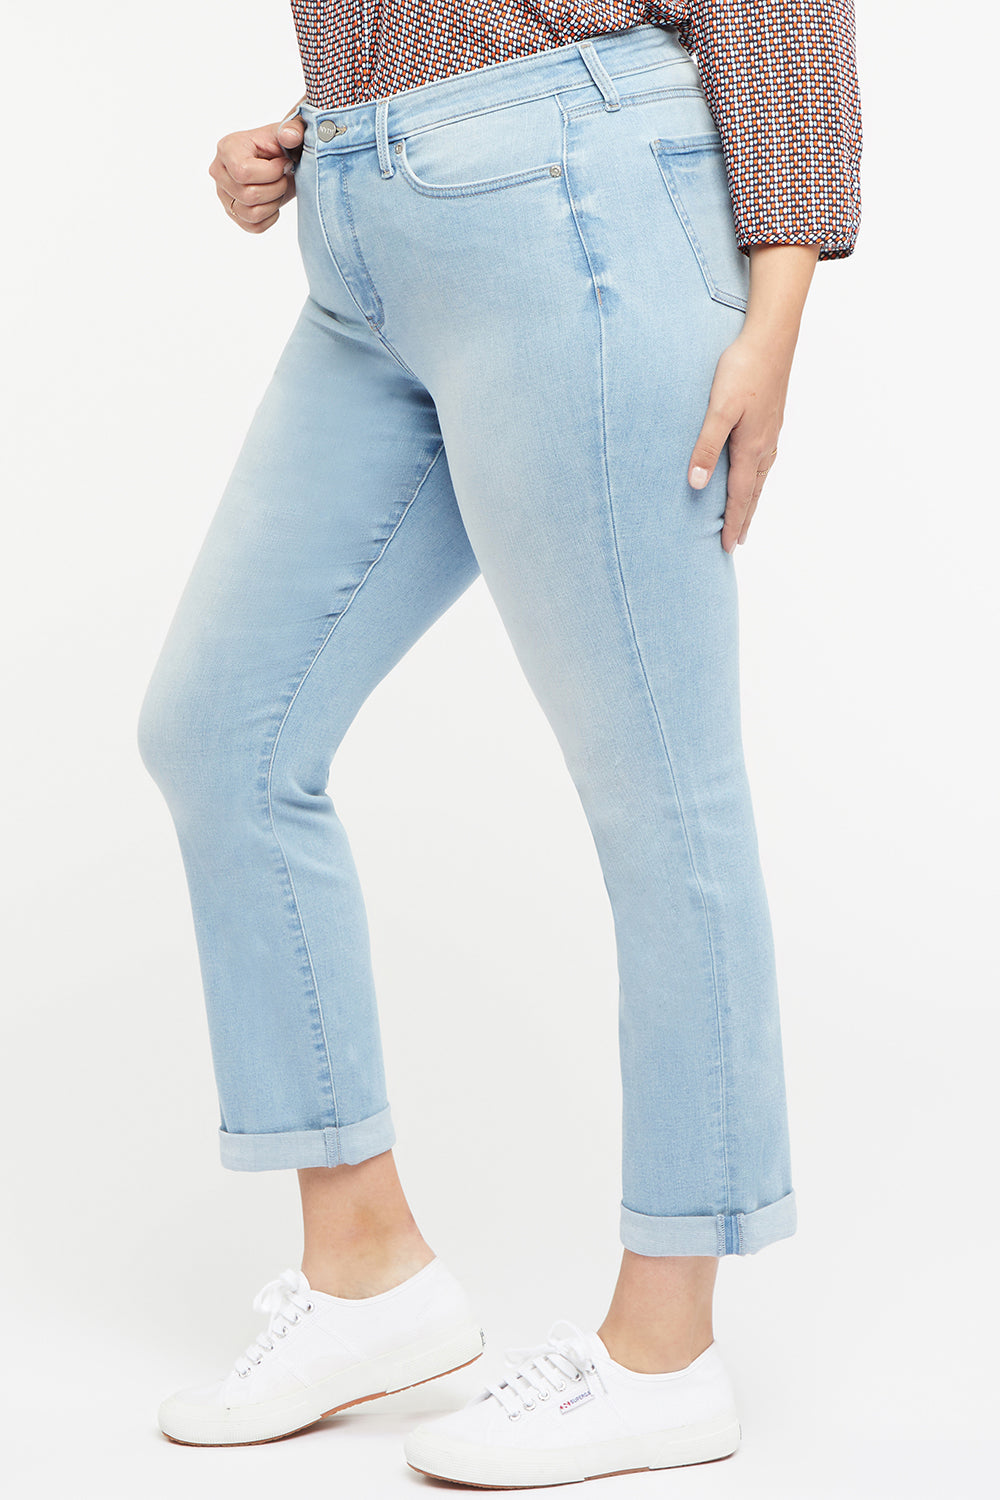 NYDJ Sheri Slim Ankle Jeans In Plus Size With Roll Cuffs - Northstar